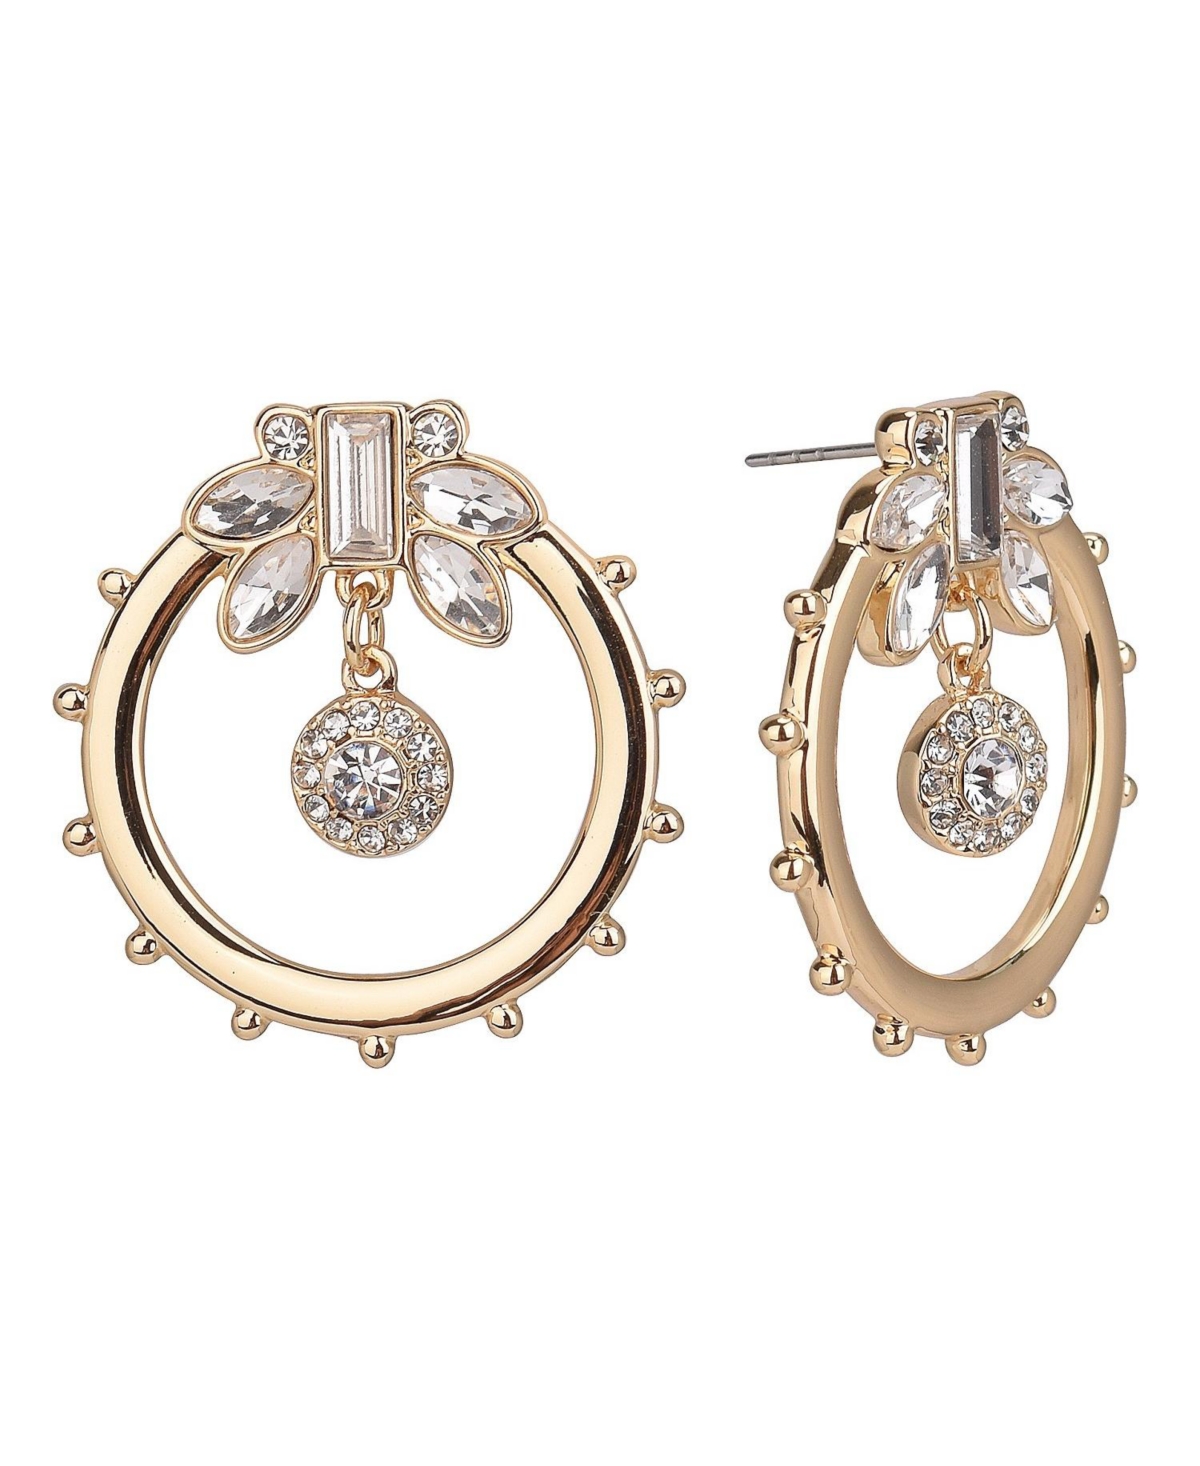 Open Ring Drop Earrings with Stones - Gold